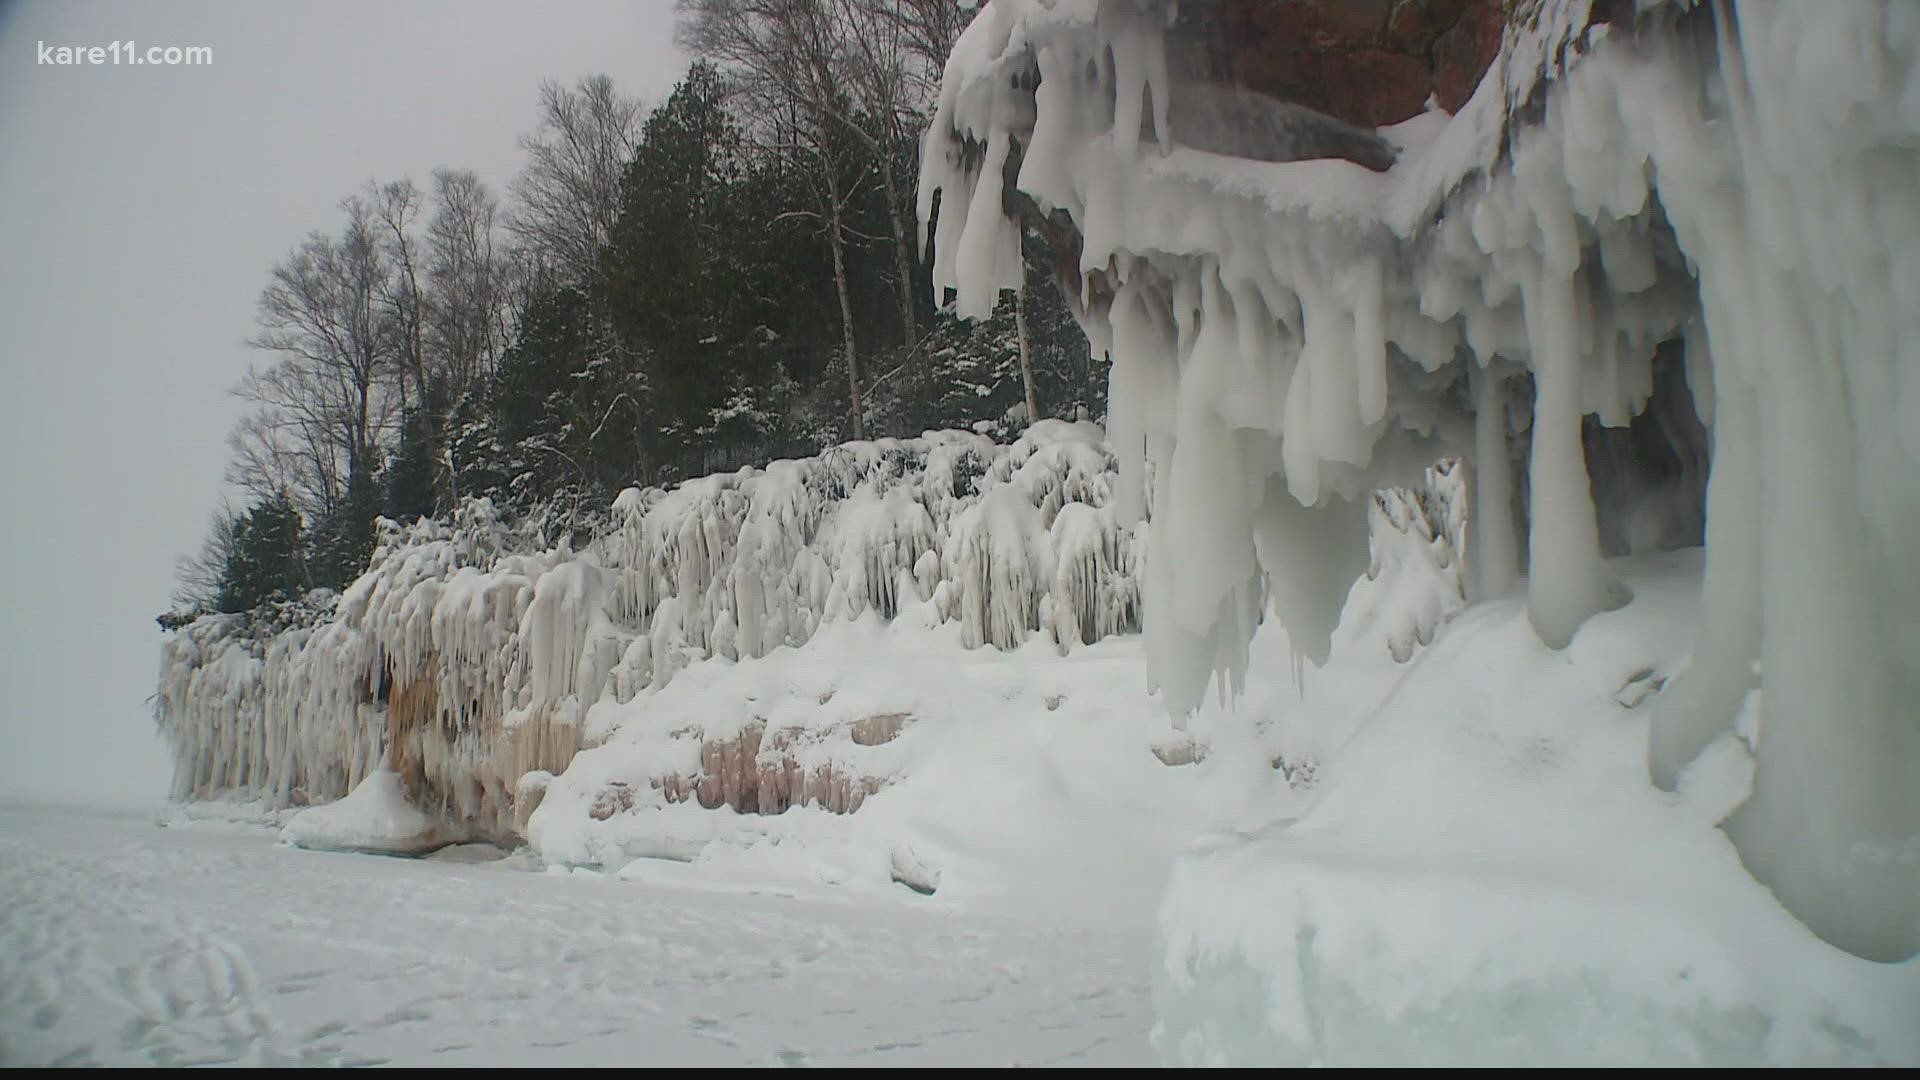 KARE reporter Boyd Huppert and photojournalist Jonathan Malat were among the throngs of visitors to the Apostle Island ice caves in 2014.